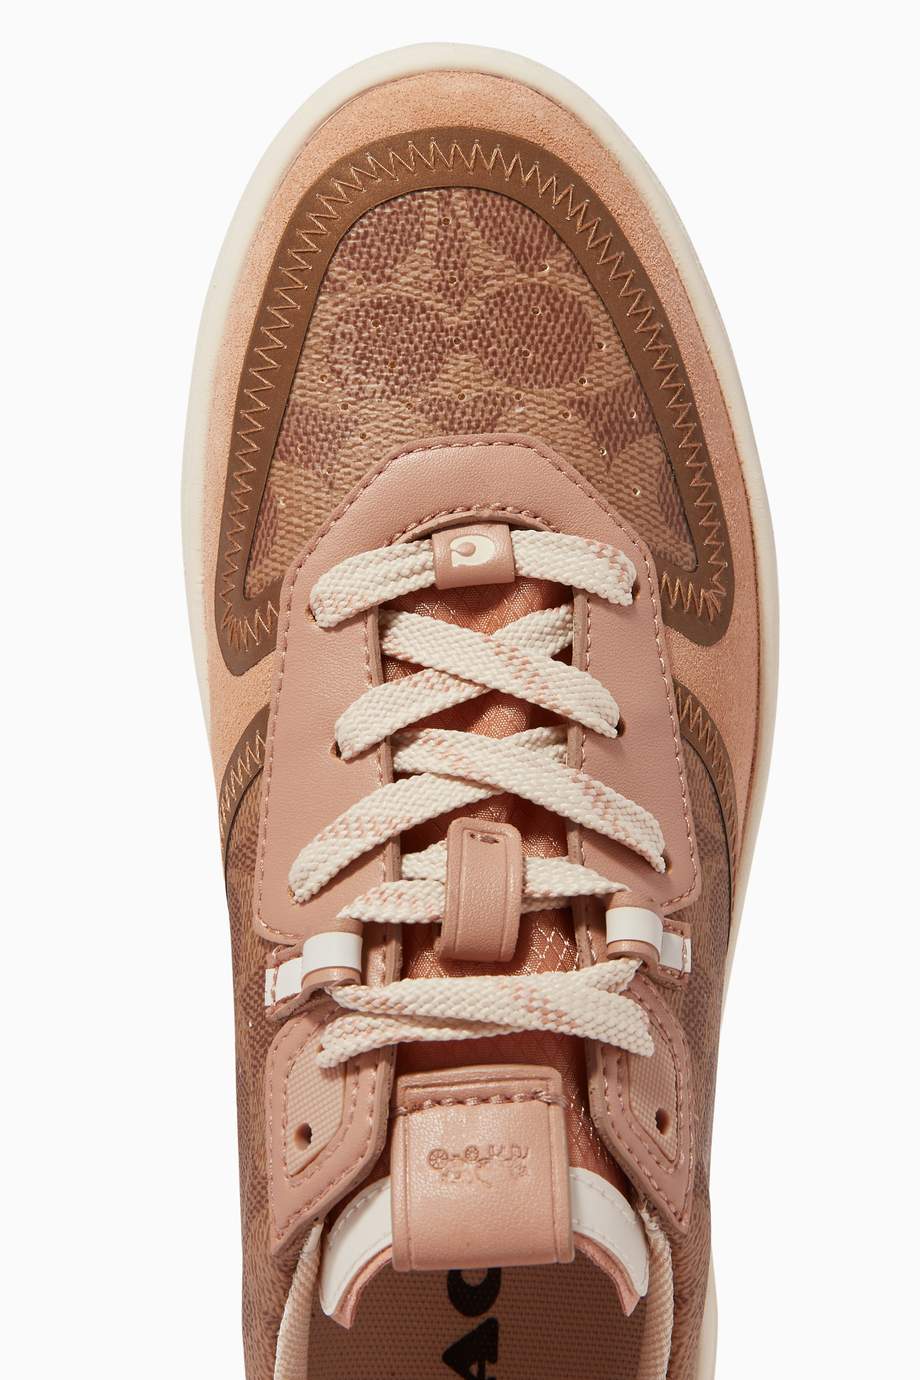 91 Limited Edition Coach shoes uae for Women